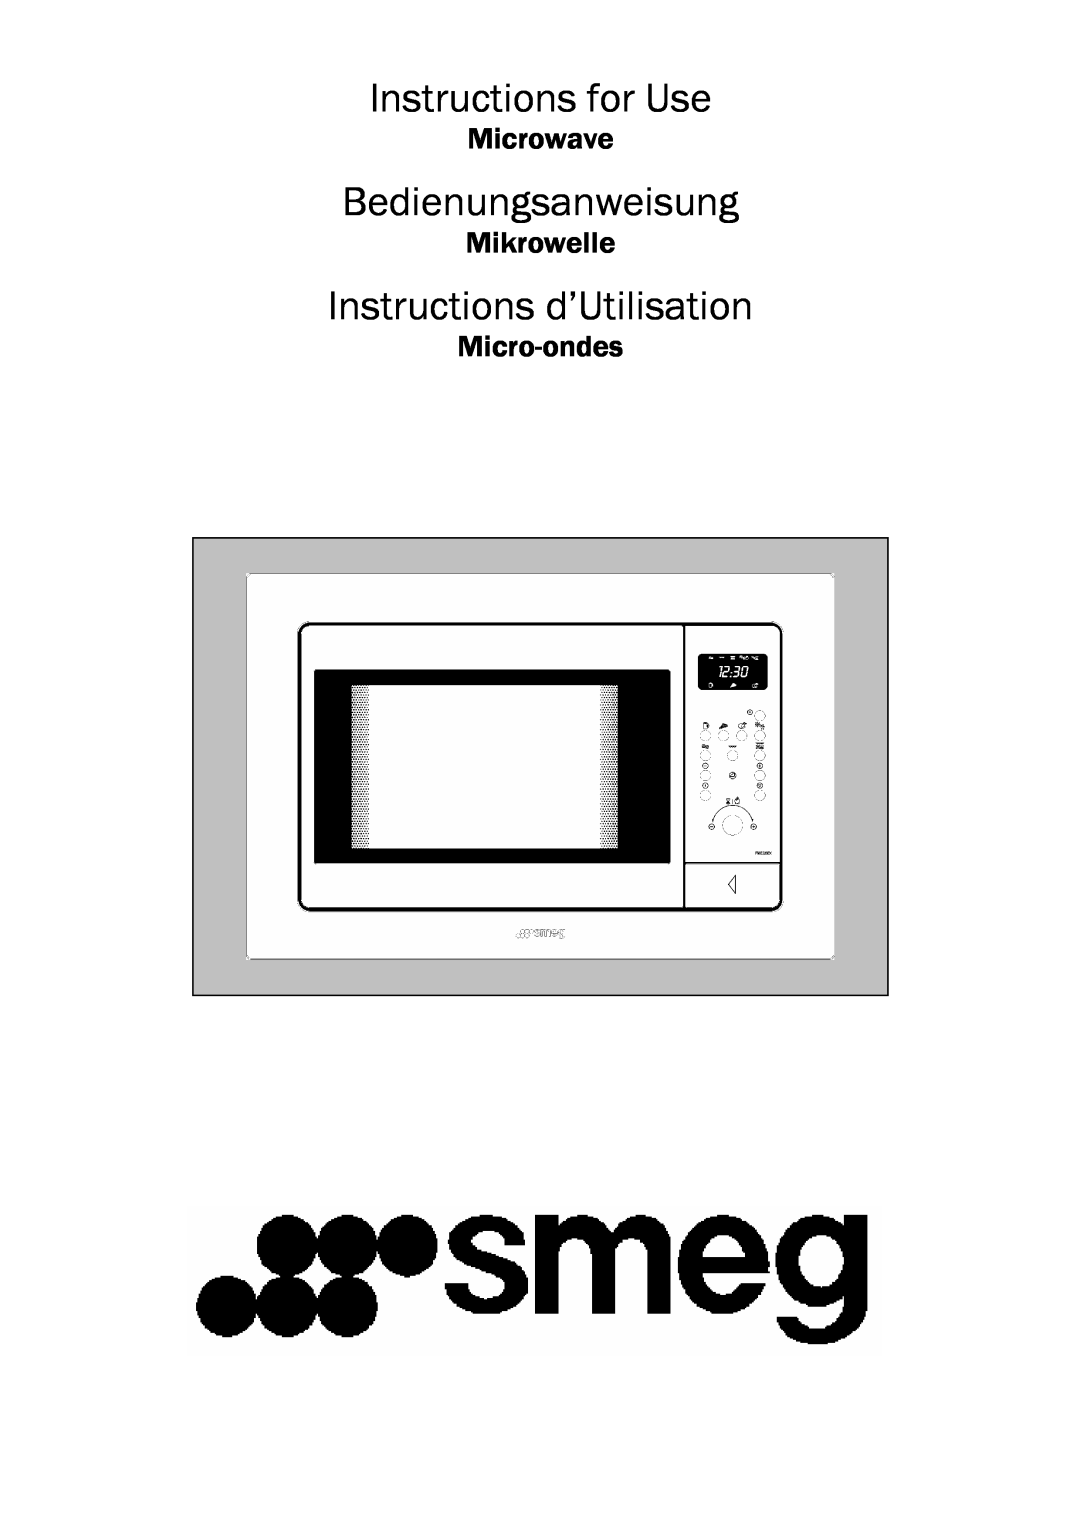 Smeg FME20EX3 manual Instructions for Use, Bedienungsanweisung, Instructions d’Utilisation, Microwave, Mikrowelle 